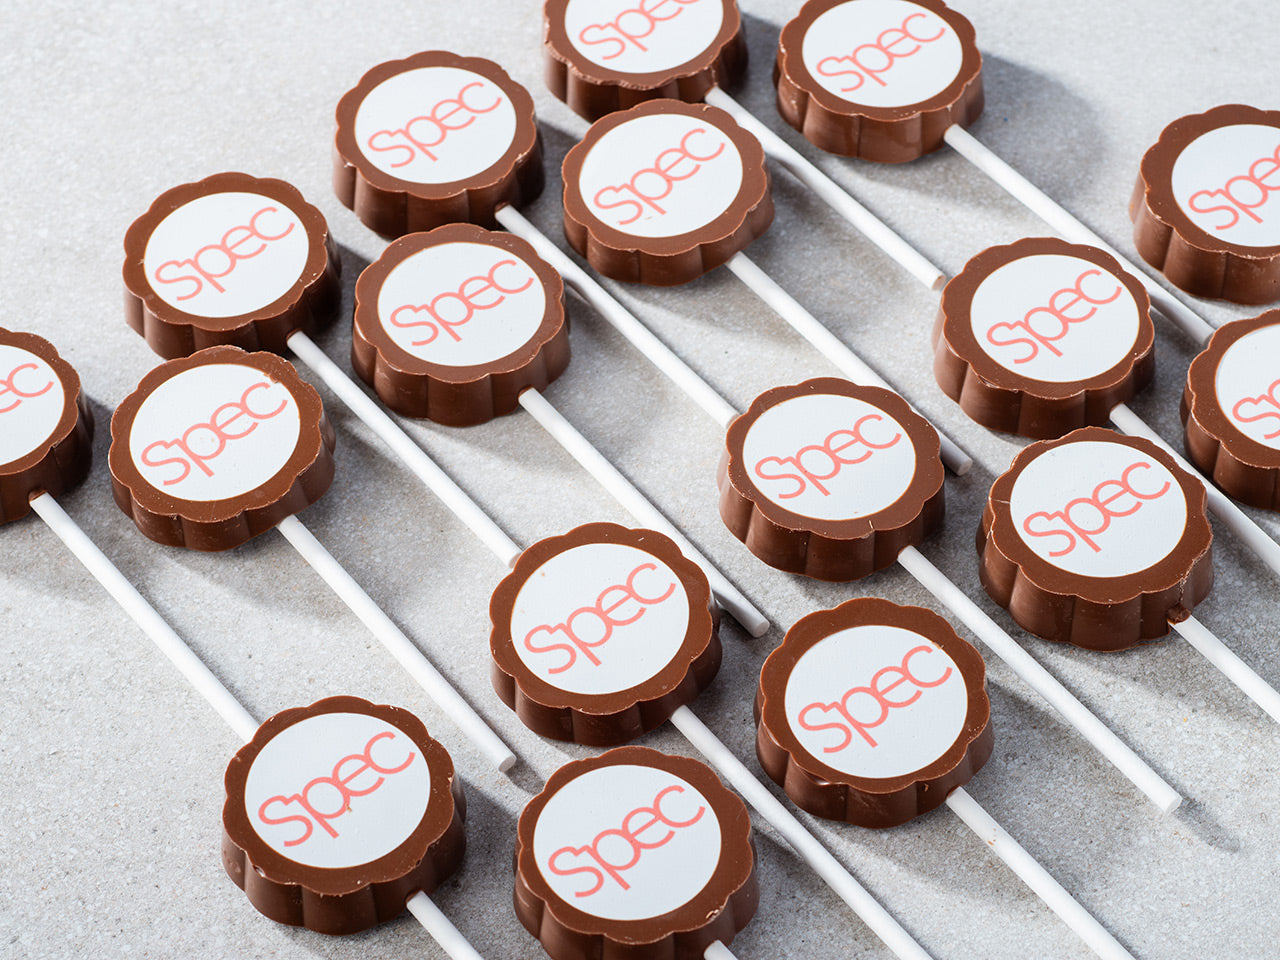 Chocolate lollypops with a brand logo